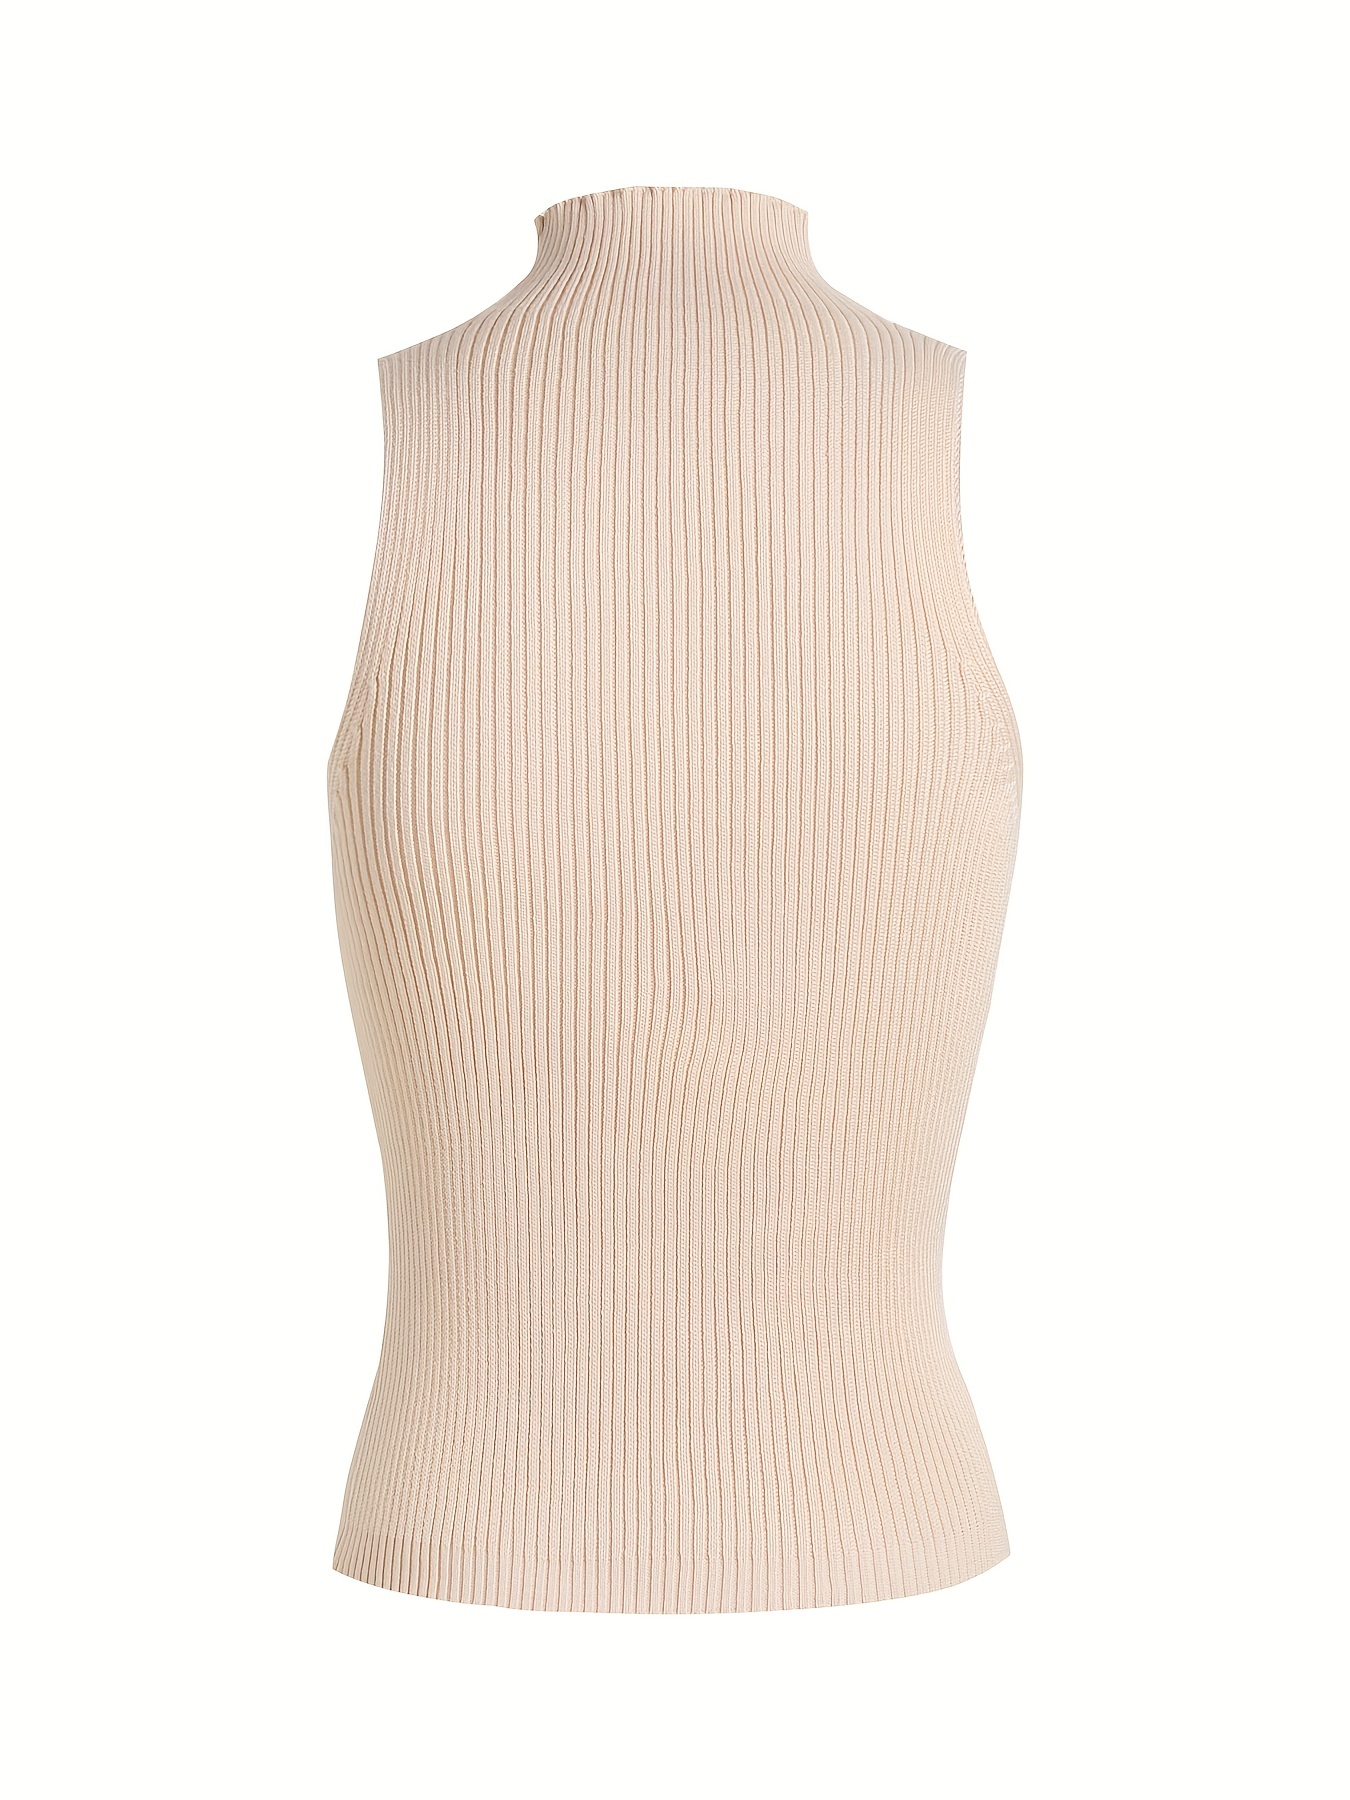 Cut Out Knit Top, Casual Stand Collar Summer Sleeveless Top